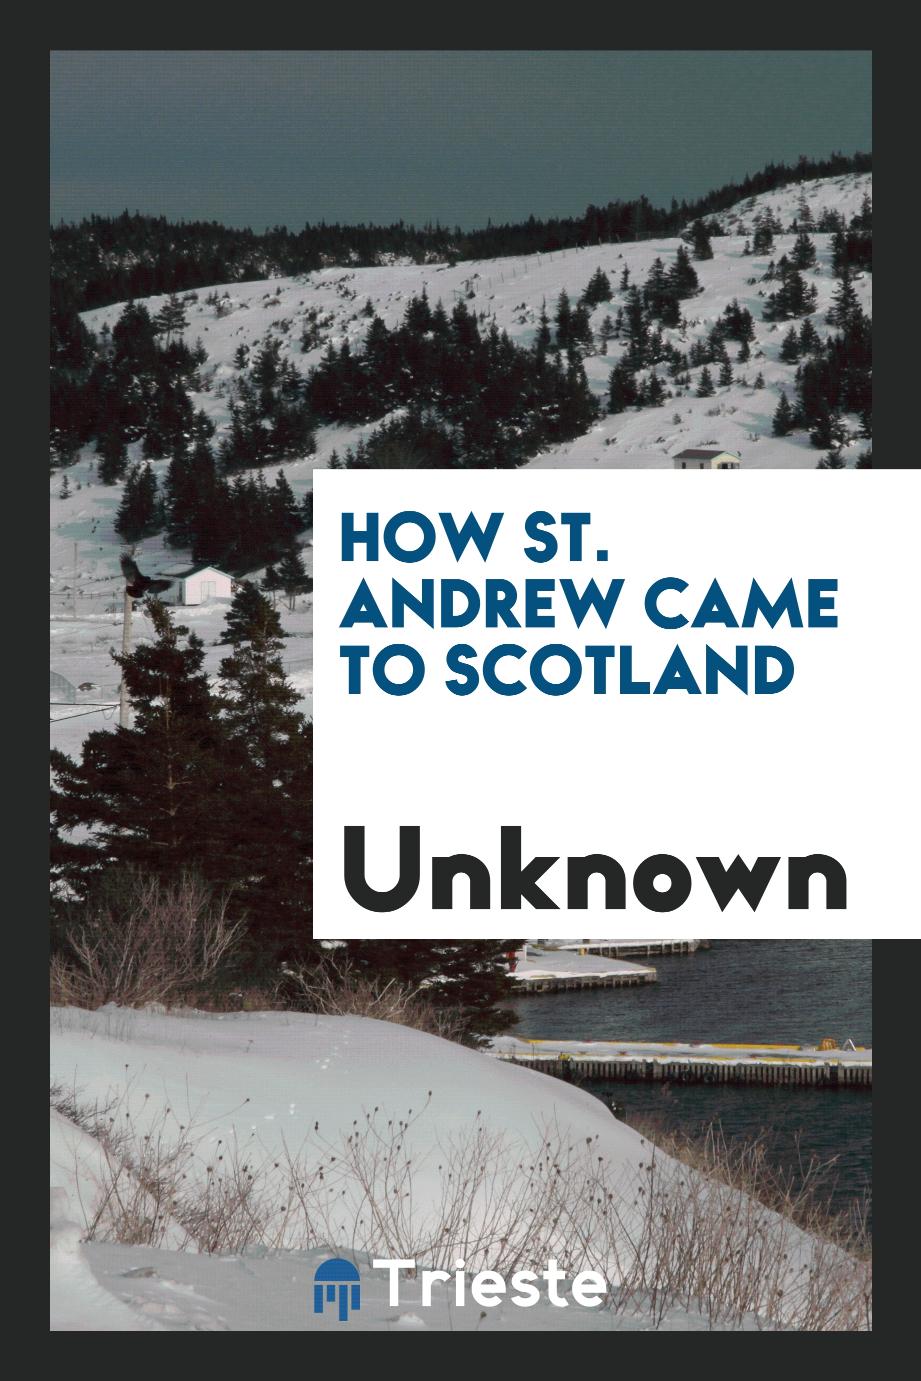 How St. Andrew came to Scotland